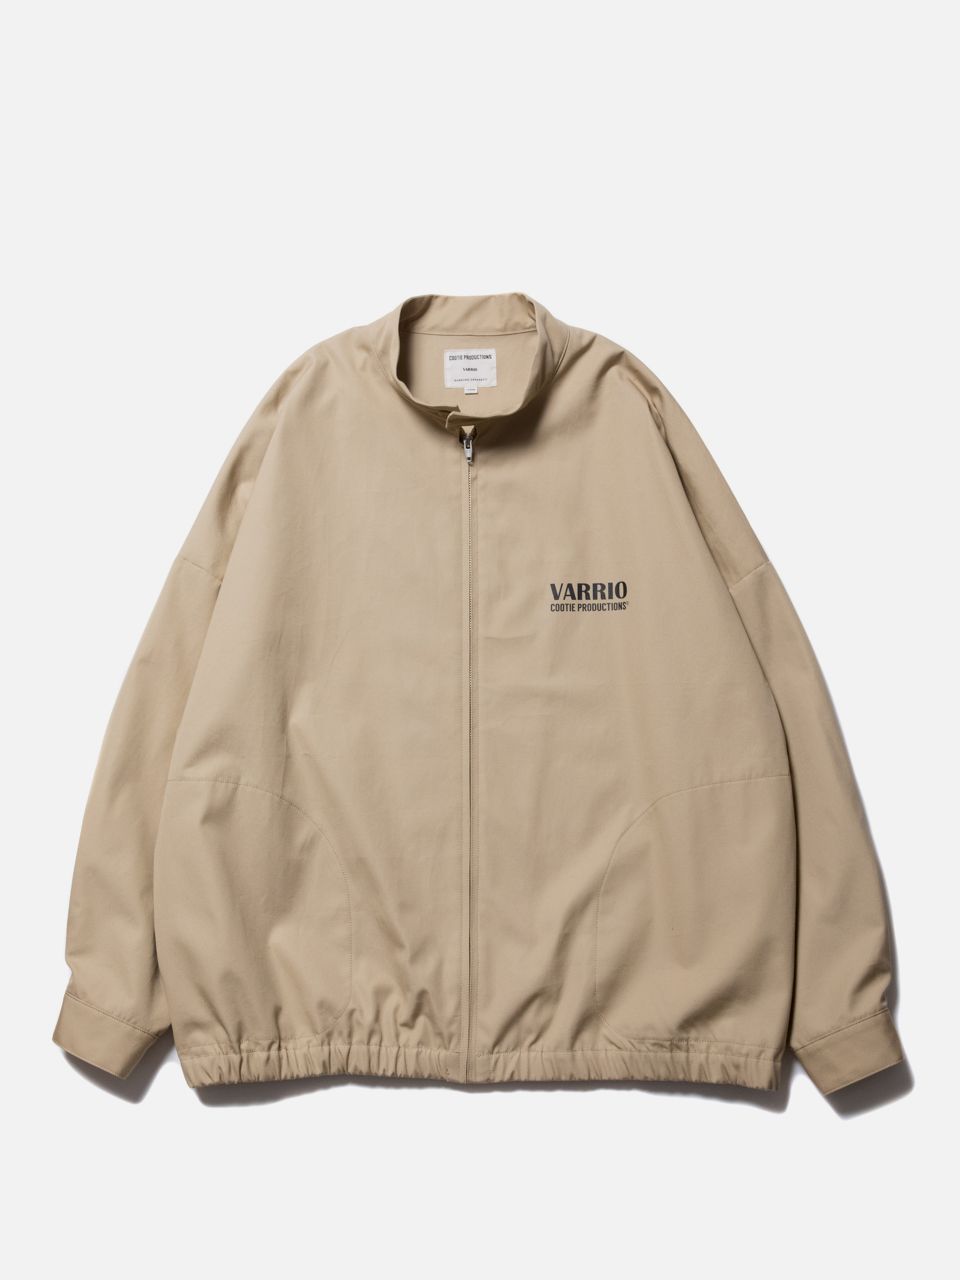 COOTIE PRODUCTIONS Ventile Track Jacket - ブルゾン